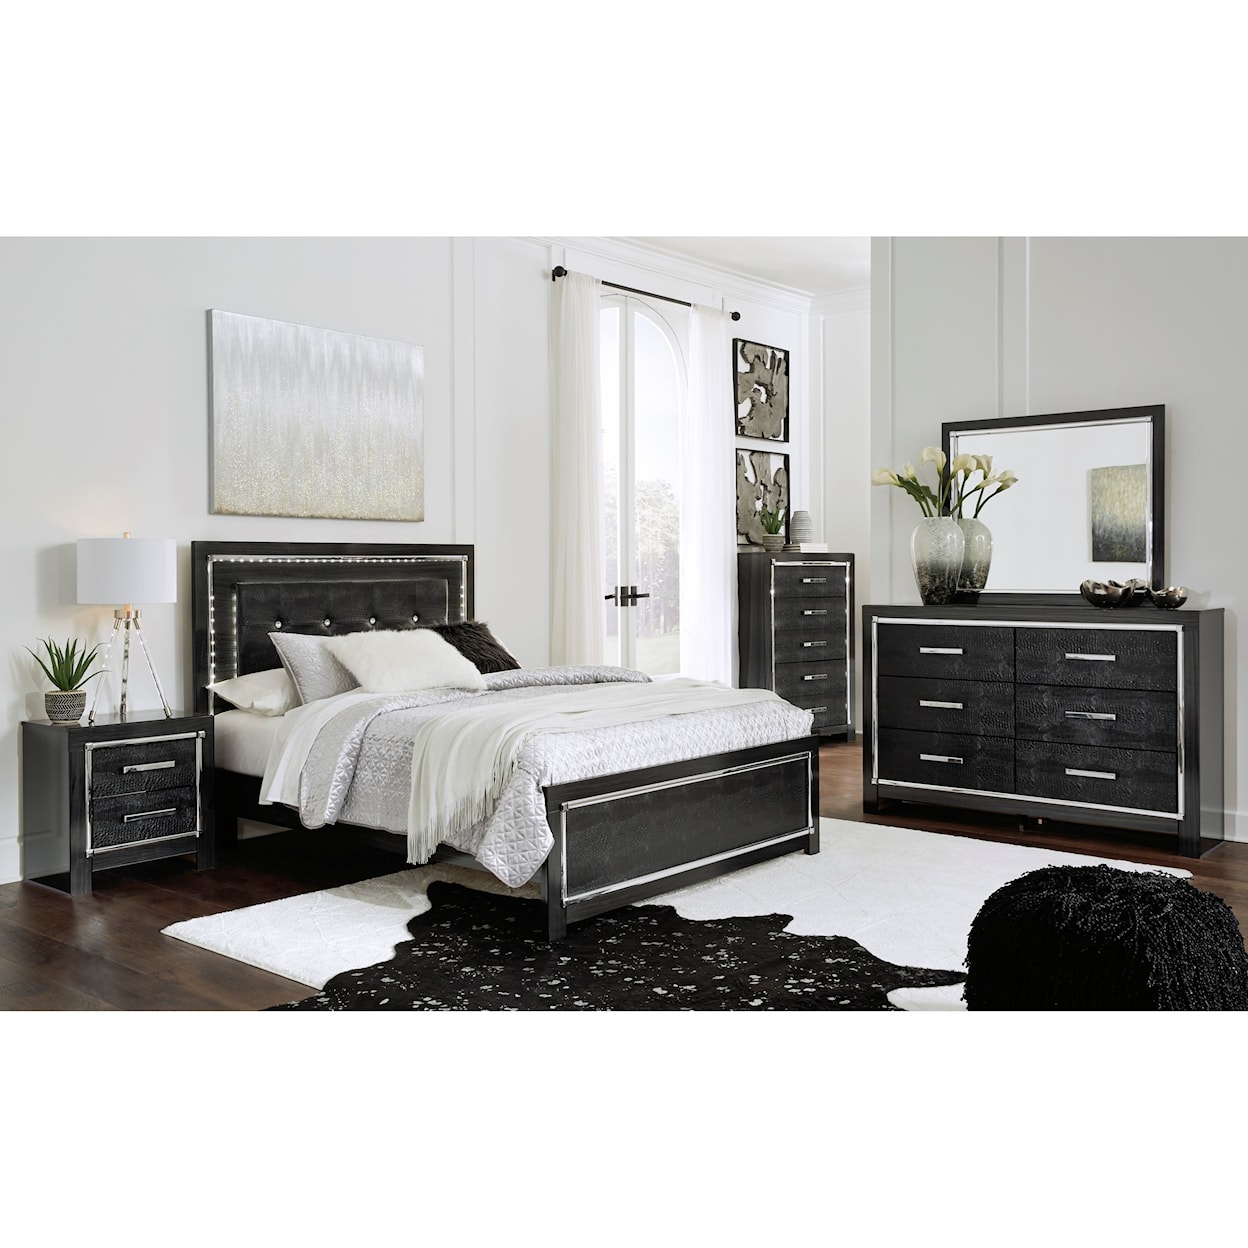 Signature Design by Ashley Kaydell 7PC Queen Bedroom Group